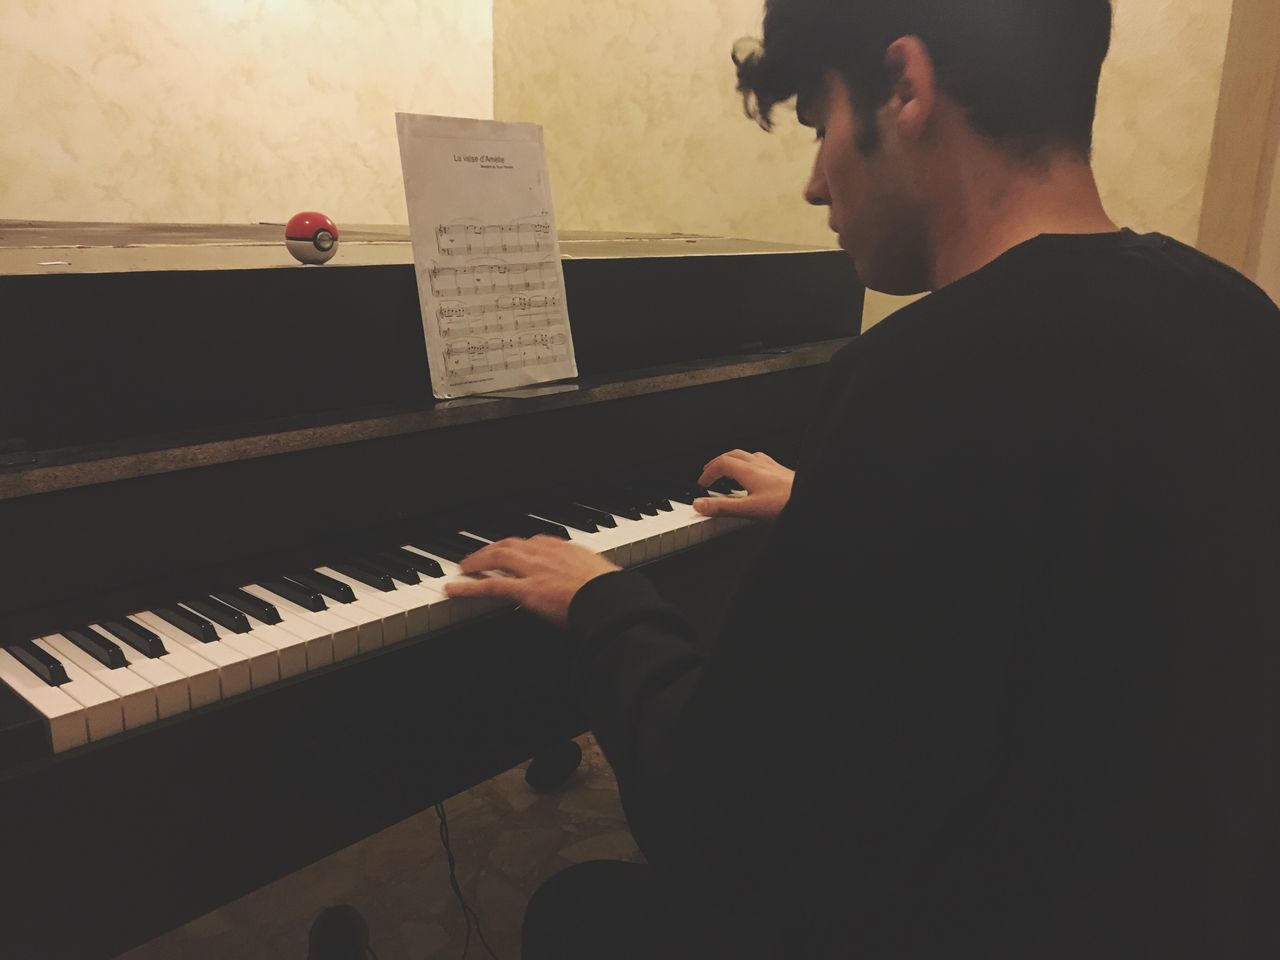 music, piano, musical instrument, playing, pianist, musician, sheet music, indoors, arts culture and entertainment, piano key, skill, one person, real people, leisure activity, practicing, men, sitting, home interior, lifestyles, learning, performance, classical music, musical note, day, human hand, young adult, people